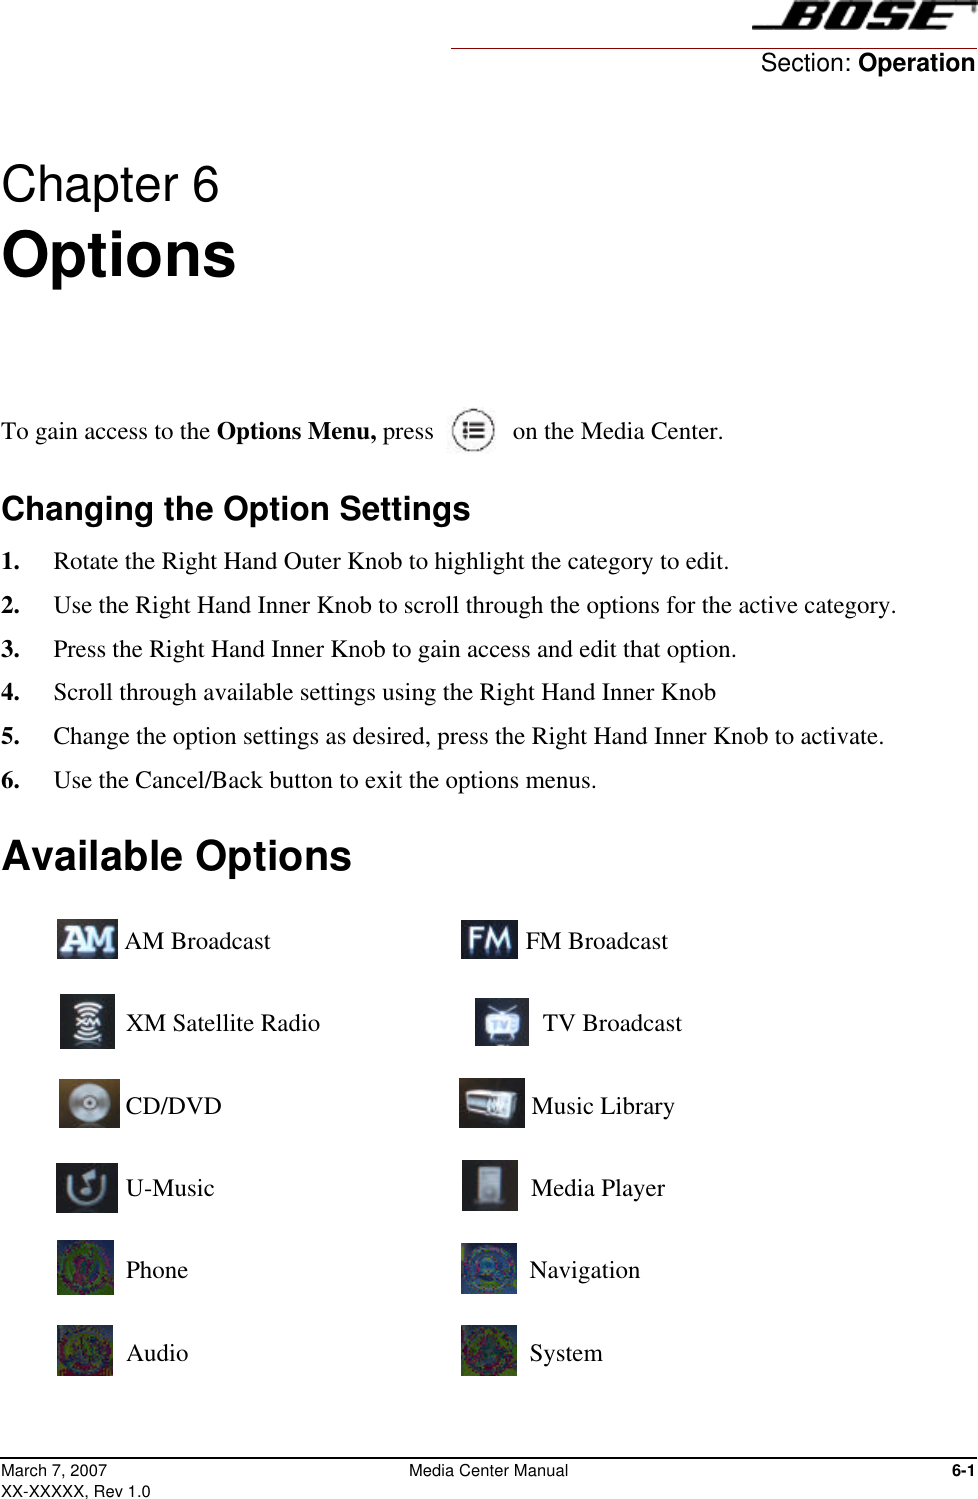 6-1Media Center ManualMarch 7, 2007XX-XXXXX, Rev 1.0Chapter 6 Options To gain access to the Options Menu, press  on the Media Center.Changing the Option Settings1.  Rotate the Right Hand Outer Knob to highlight the category to edit. 2.  Use the Right Hand Inner Knob to scroll through the options for the active category. 3.  Press the Right Hand Inner Knob to gain access and edit that option.4.  Scroll through available settings using the Right Hand Inner Knob5.  Change the option settings as desired, press the Right Hand Inner Knob to activate.6.  Use the Cancel/Back button to exit the options menus.Available Options AM Broadcast                               FM Broadcast XM Satellite Radio                         TV Broadcast CD/DVD                                       Music Library U-Music                                        Media Player  Phone                                            Navigation Audio                                            SystemSection: Operation